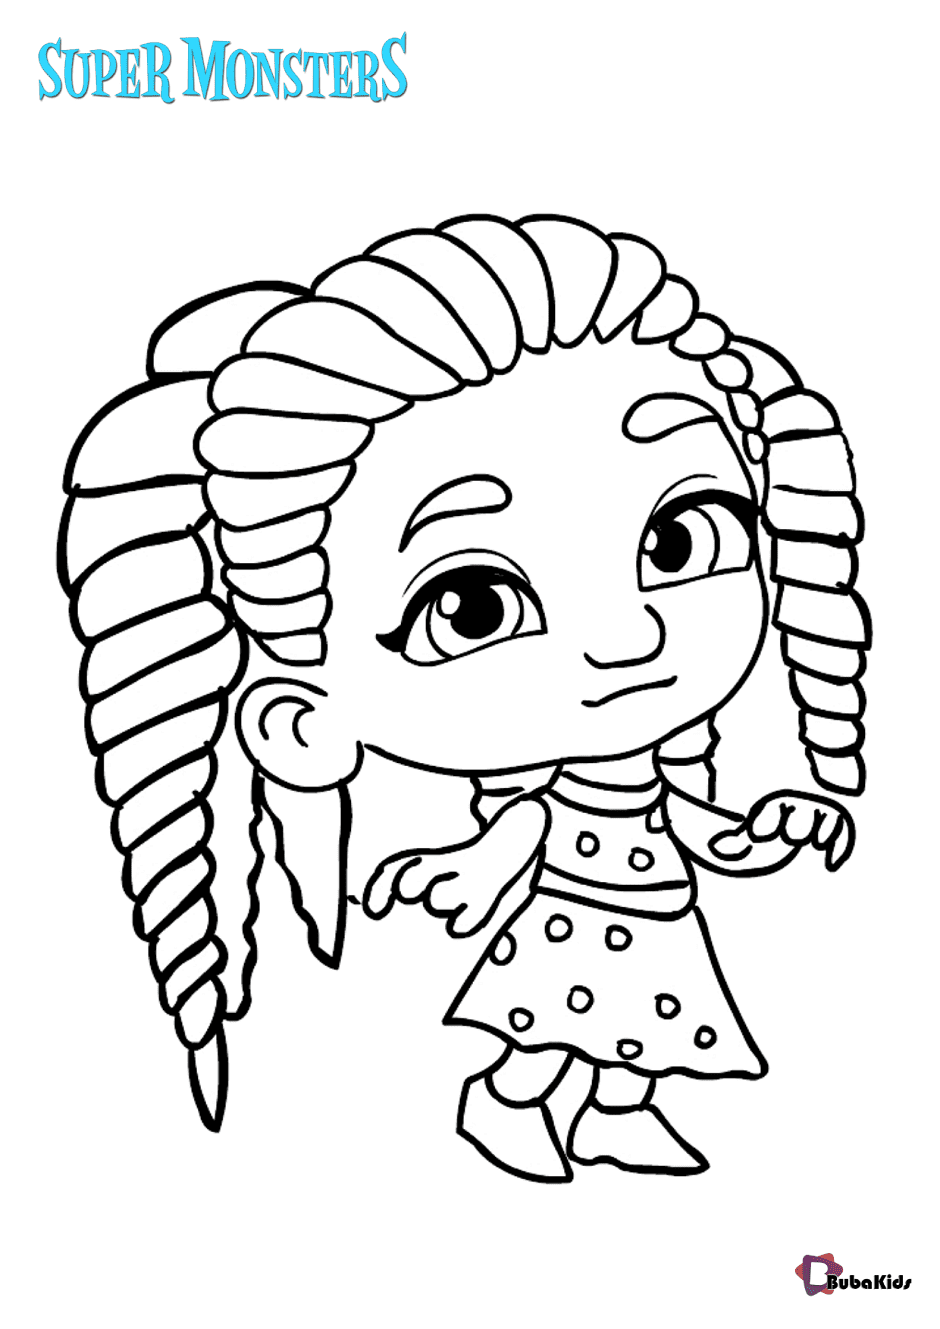 41 Free Printable Super Monsters Coloring Pages